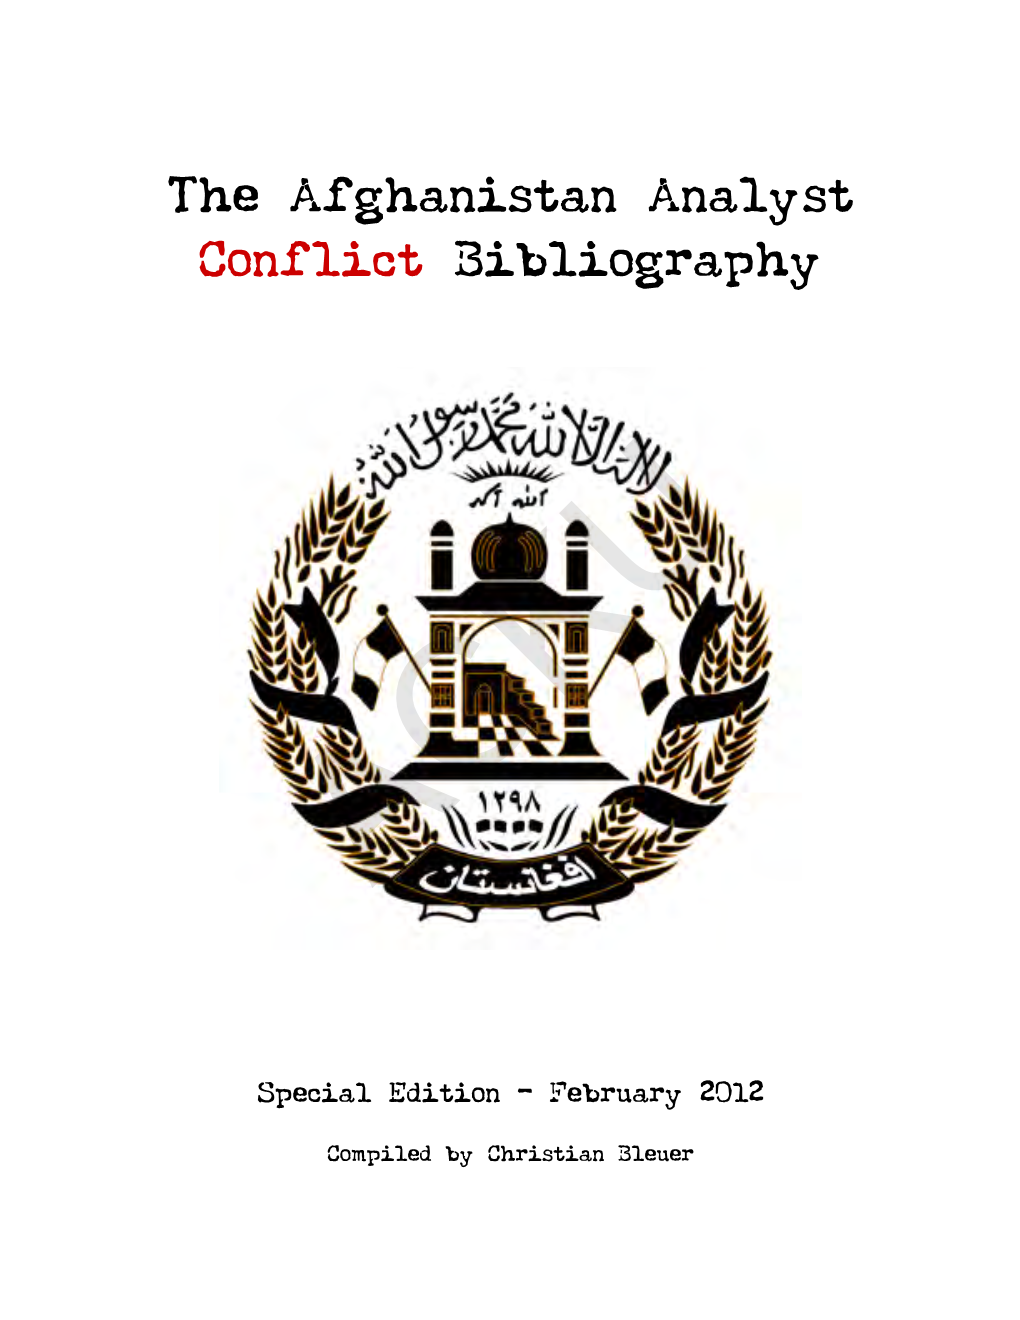 The Afghanistan Analyst Conflict Bibliography